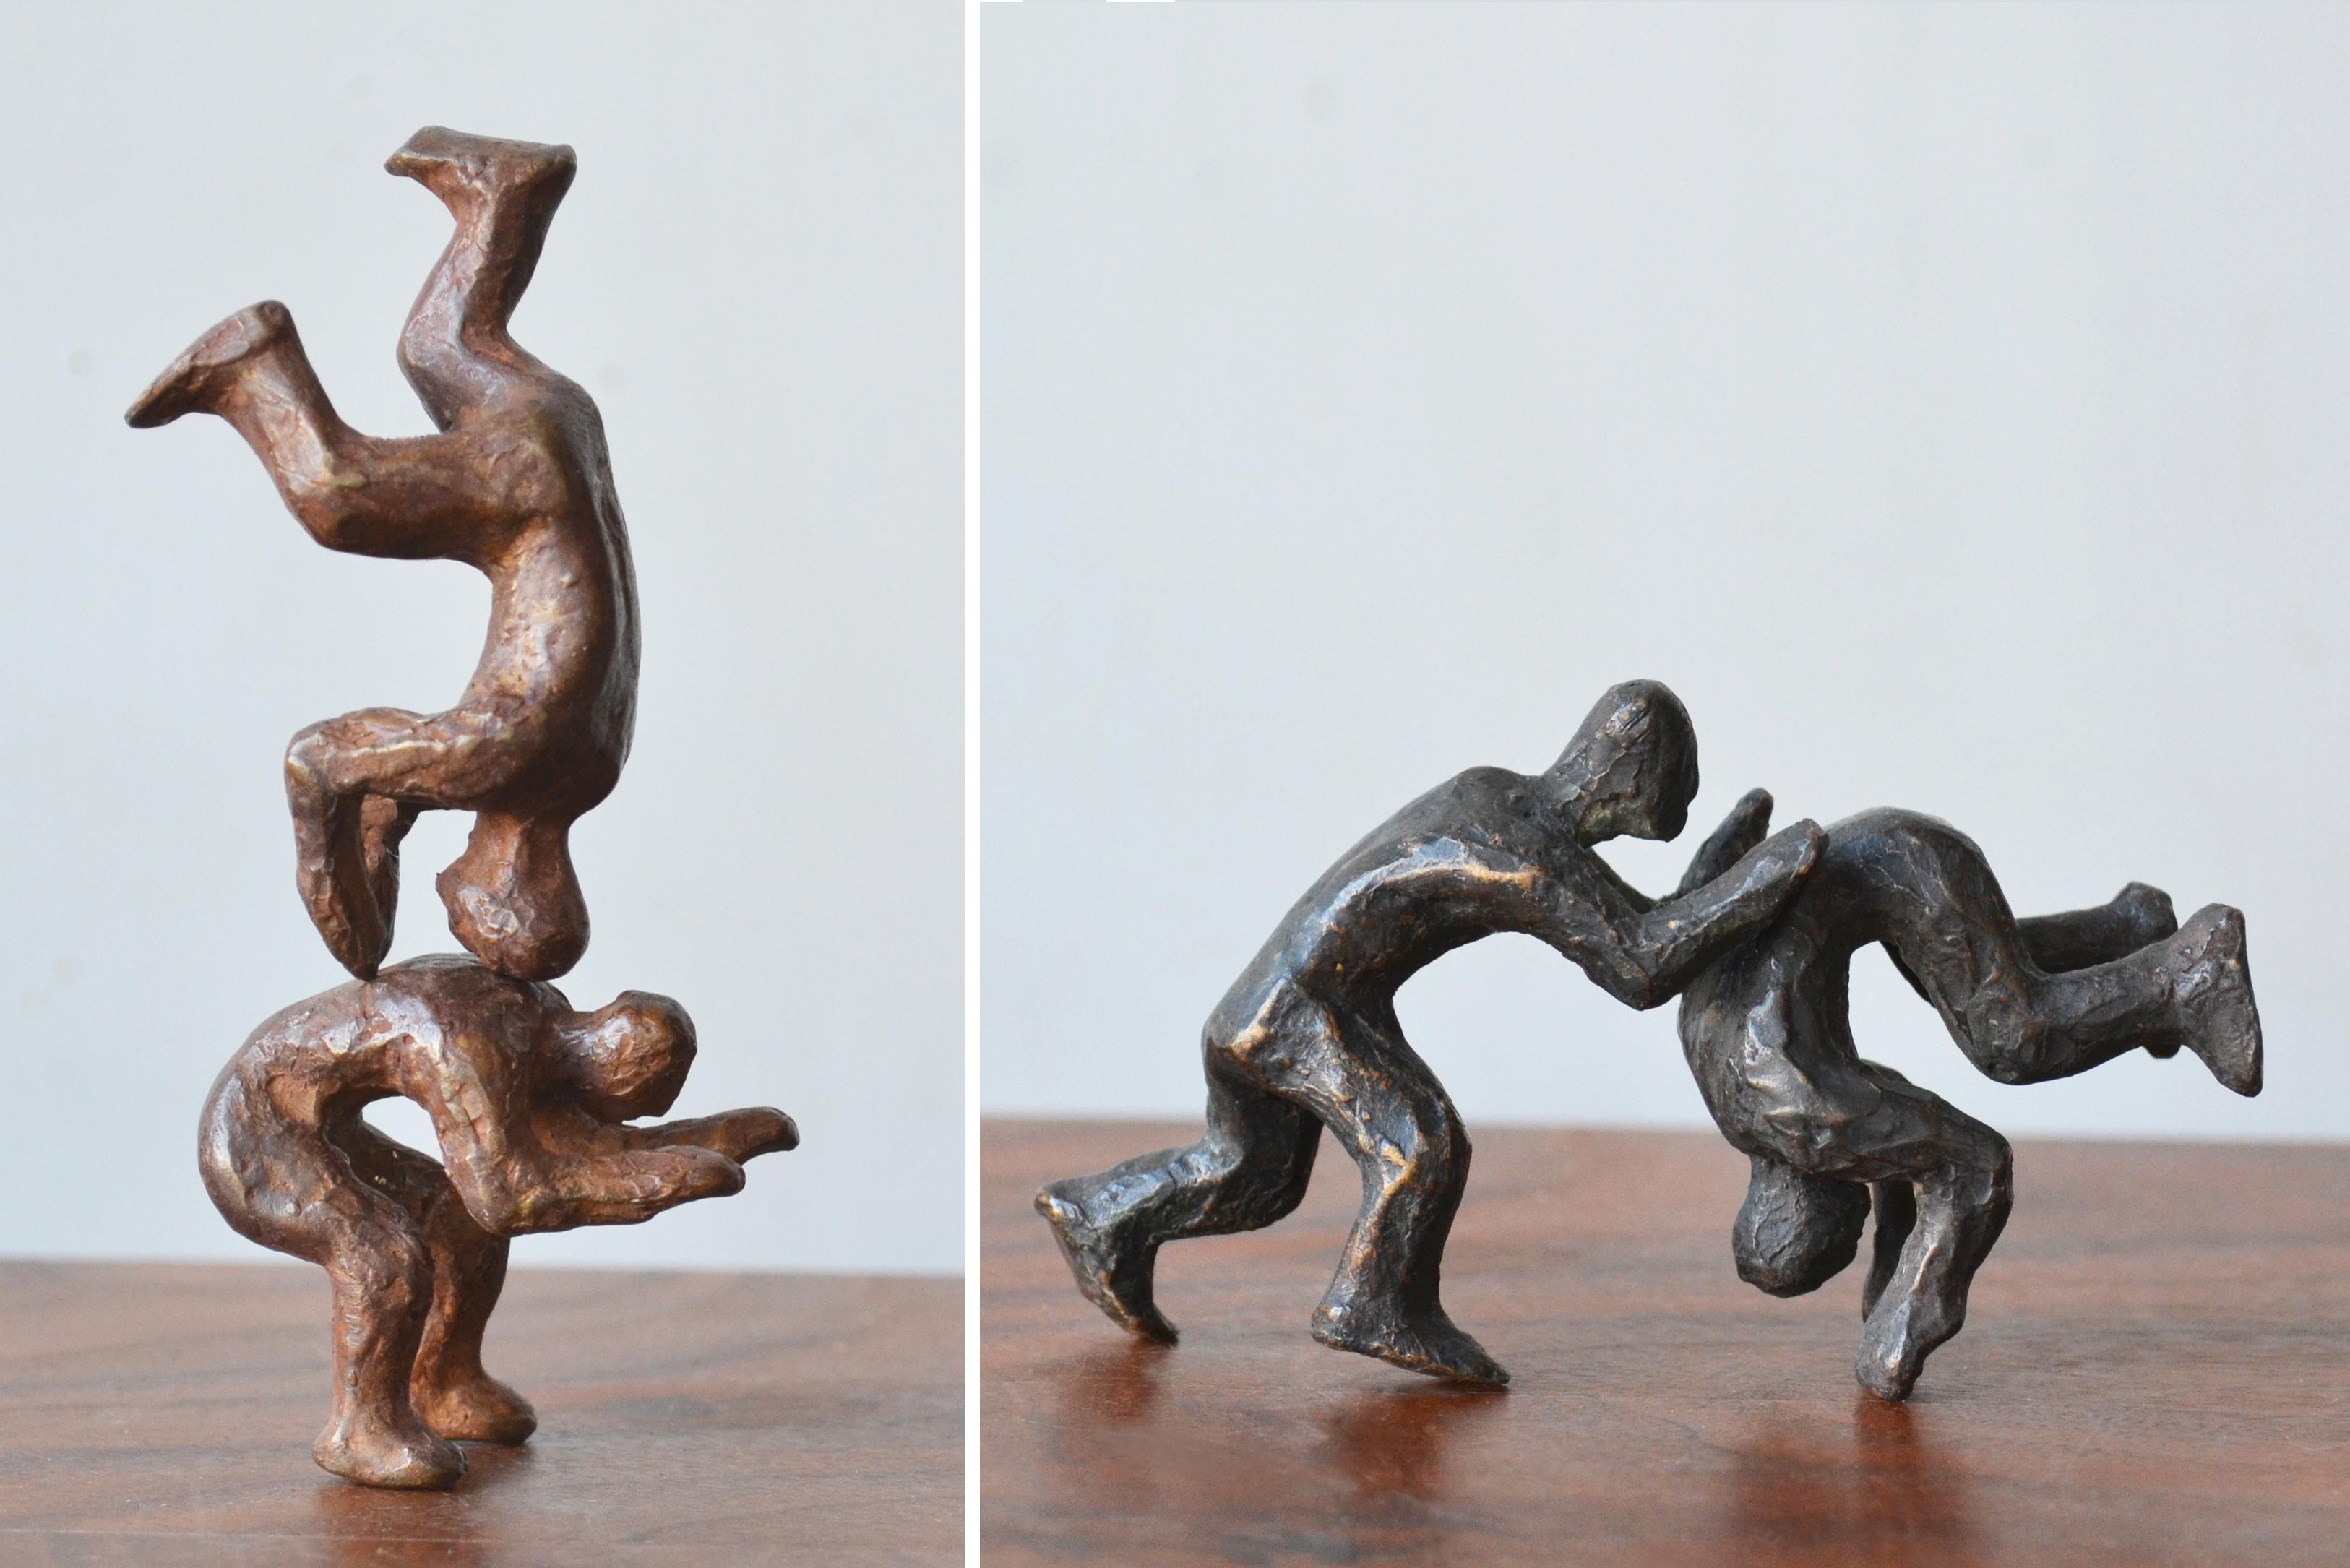 Why Fight When You Can Play? 3 Pairs interactive miniature bronze figures  - Gold Figurative Sculpture by Noa Bornstein